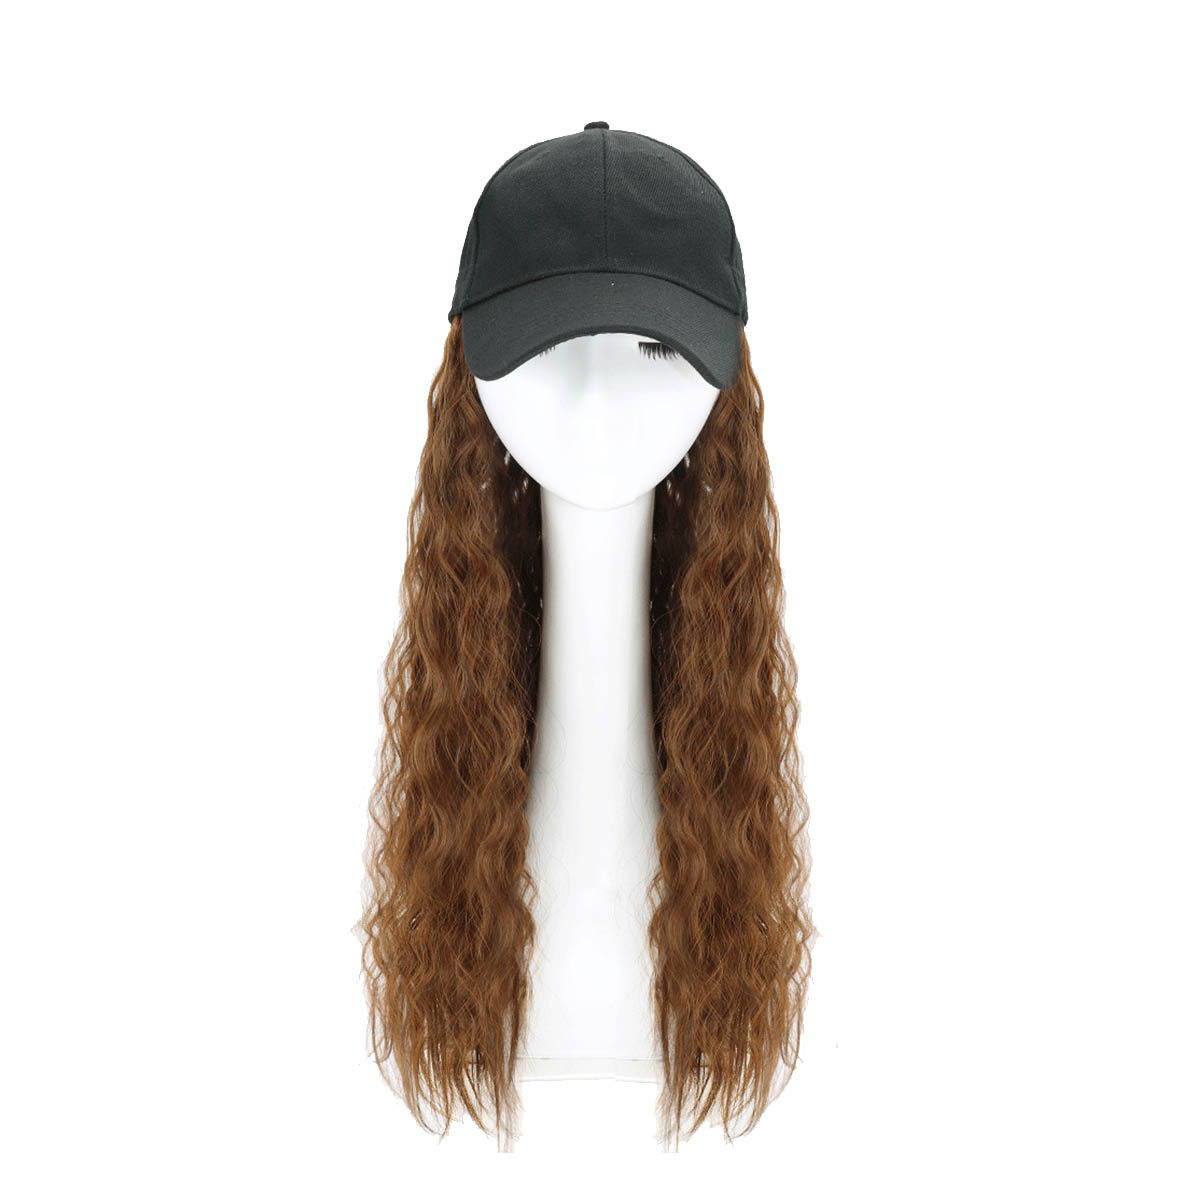 

Woman Girl Cap Wig Hat Light Long Wavy Halloween Party Curly